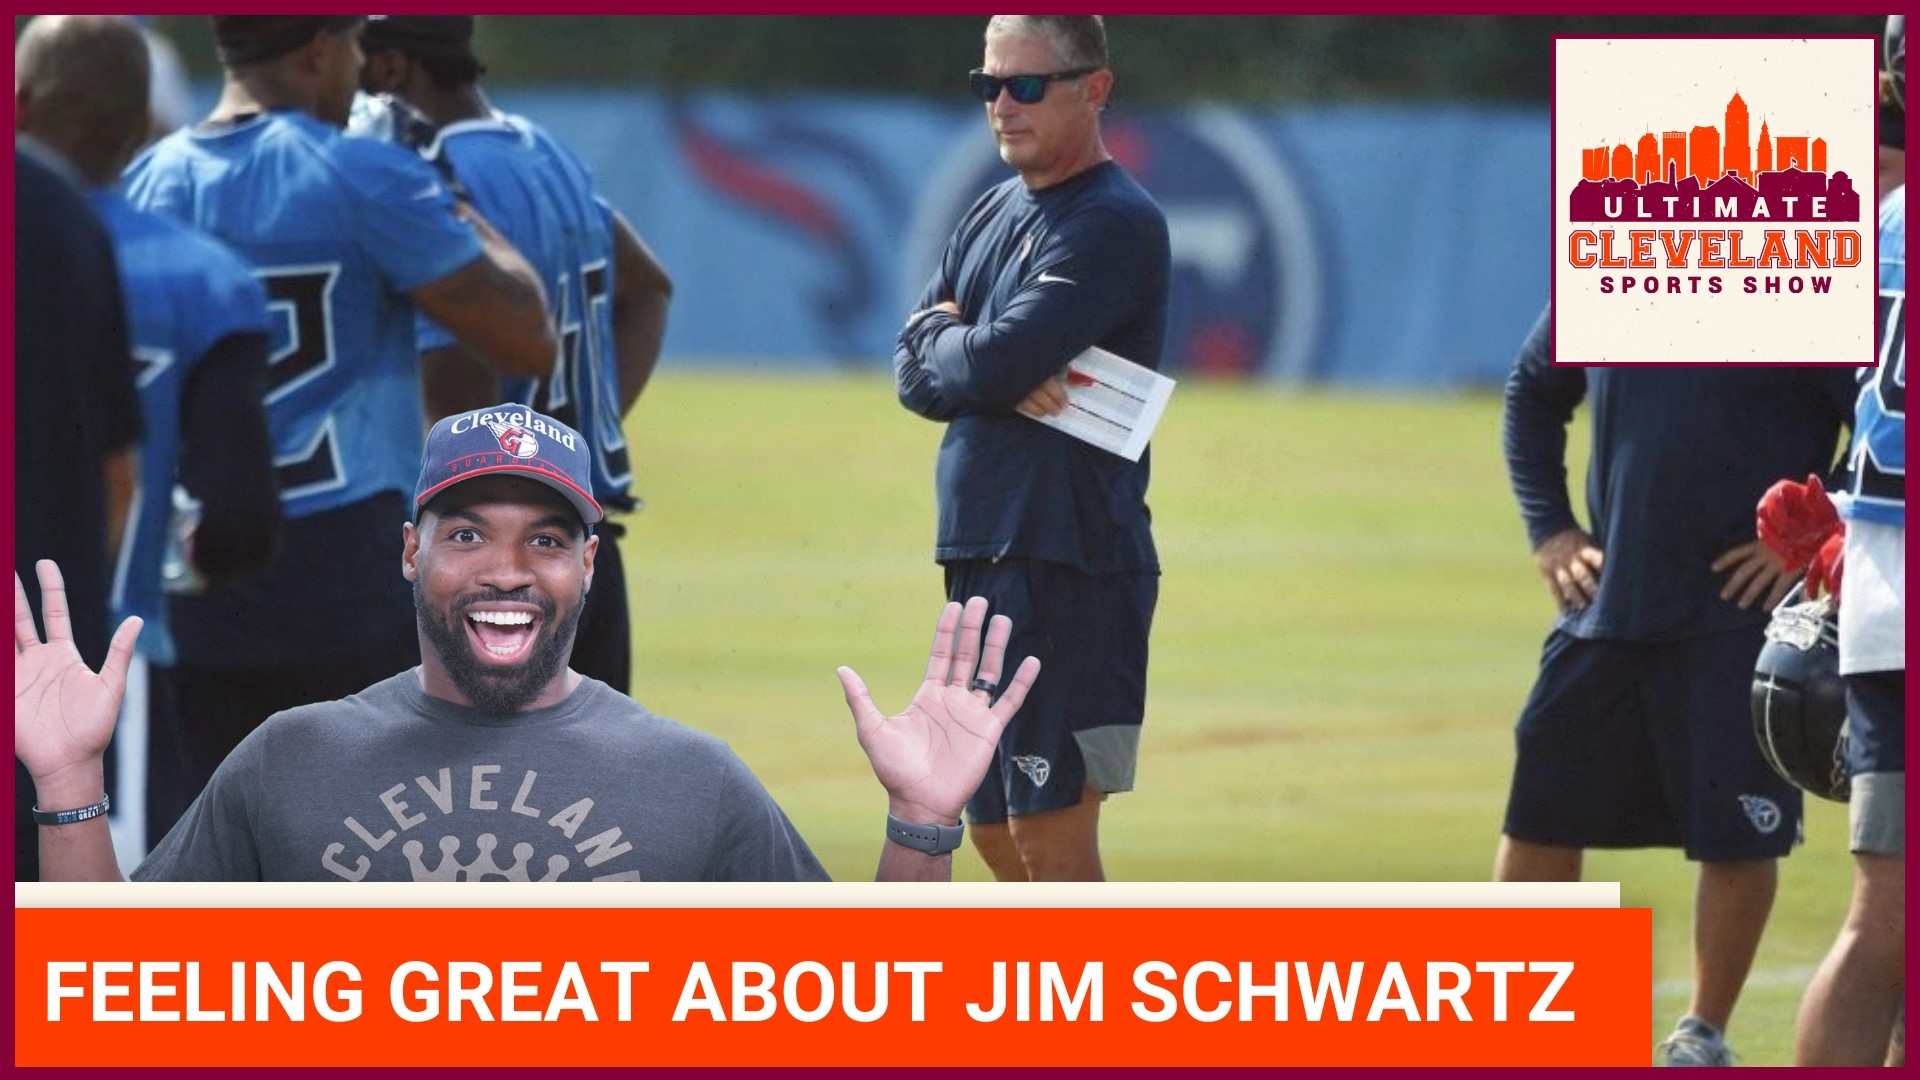 Teresa Walker has been covering the Tennessee Titans for 30 years and is here on UCSS to let Cleveland Browns fans know who they are getting with Jim Schwartz.